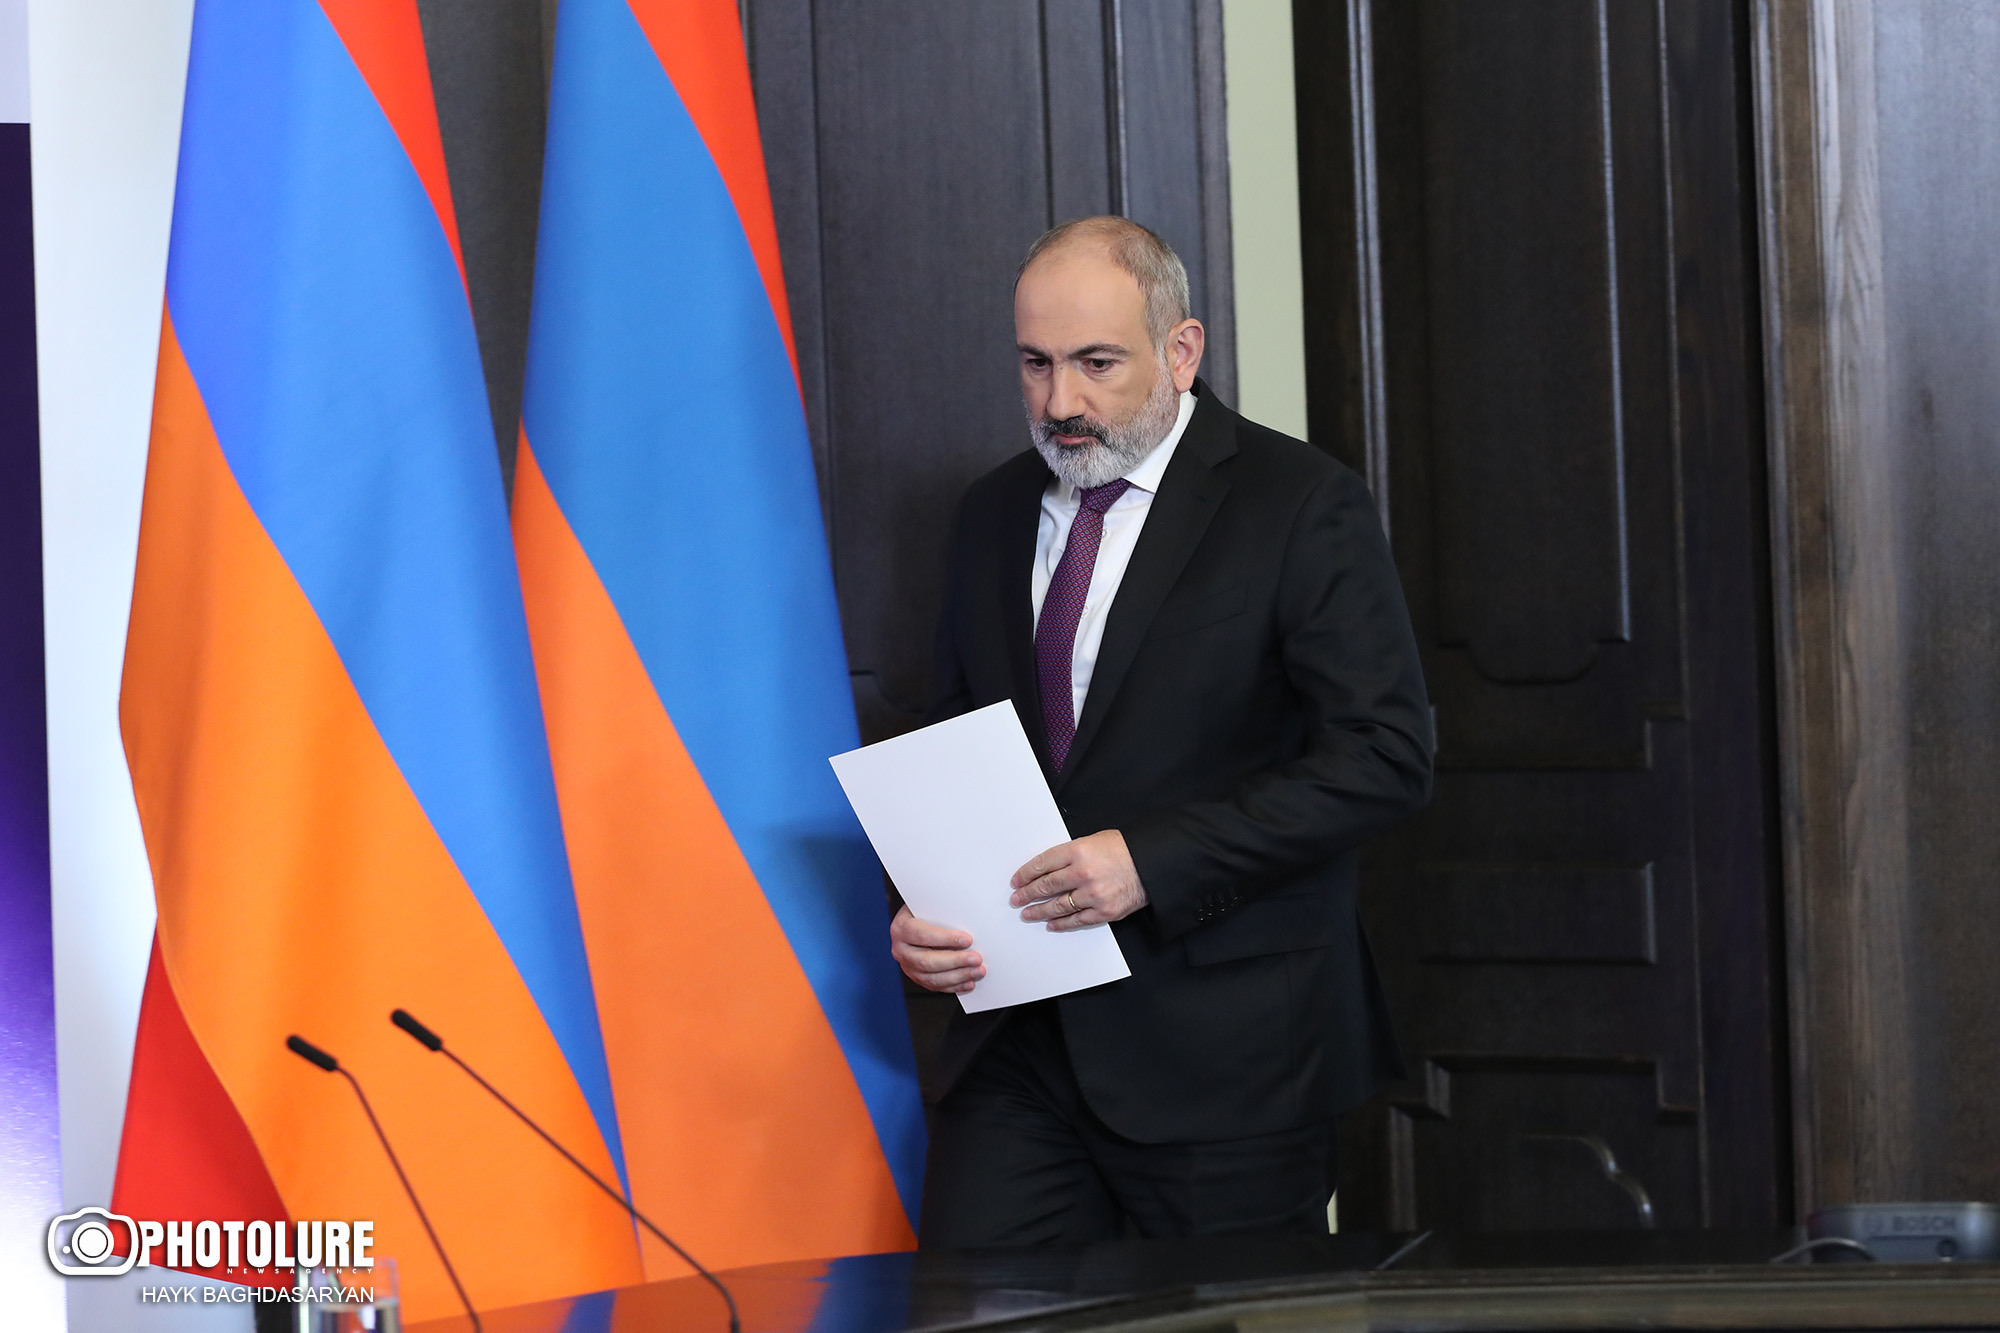 Nikol Pashinyan does not have a mandate to hand over Artsakh to Azerbaijan